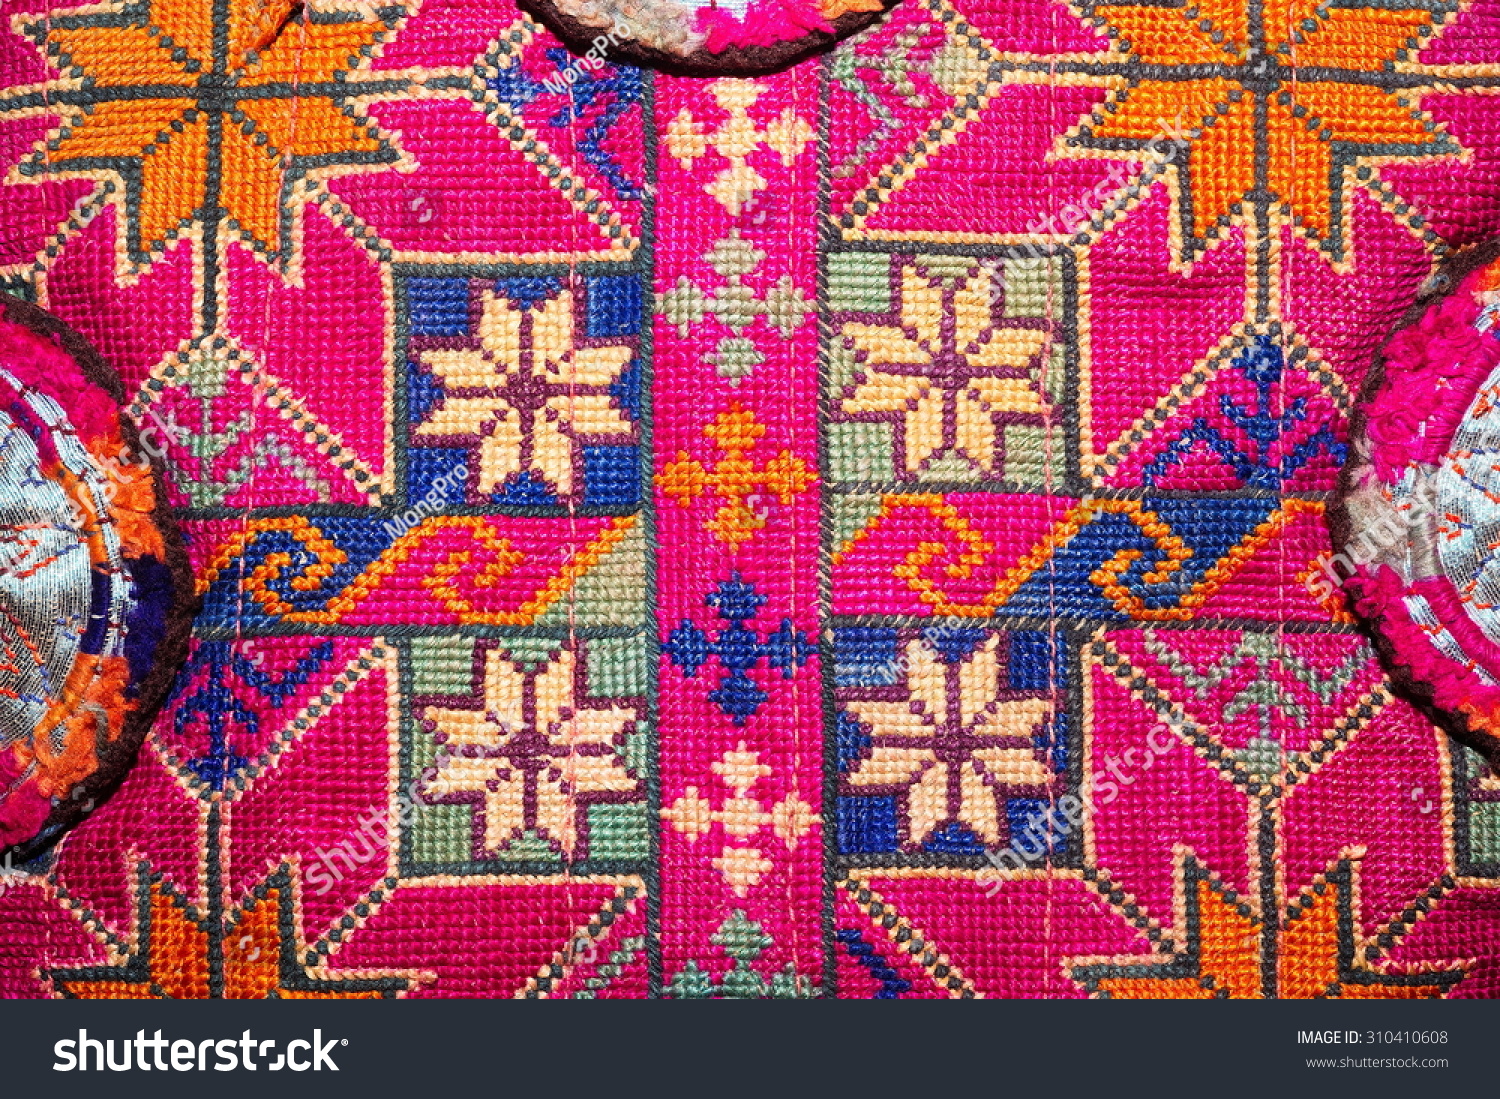 Colorful thai handcraft peruvian style rug surface close up. More of this motif & more textiles peruvian stripe beautiful background tapestry persian nomad detail pattern arabic fashionable textile. #310410608